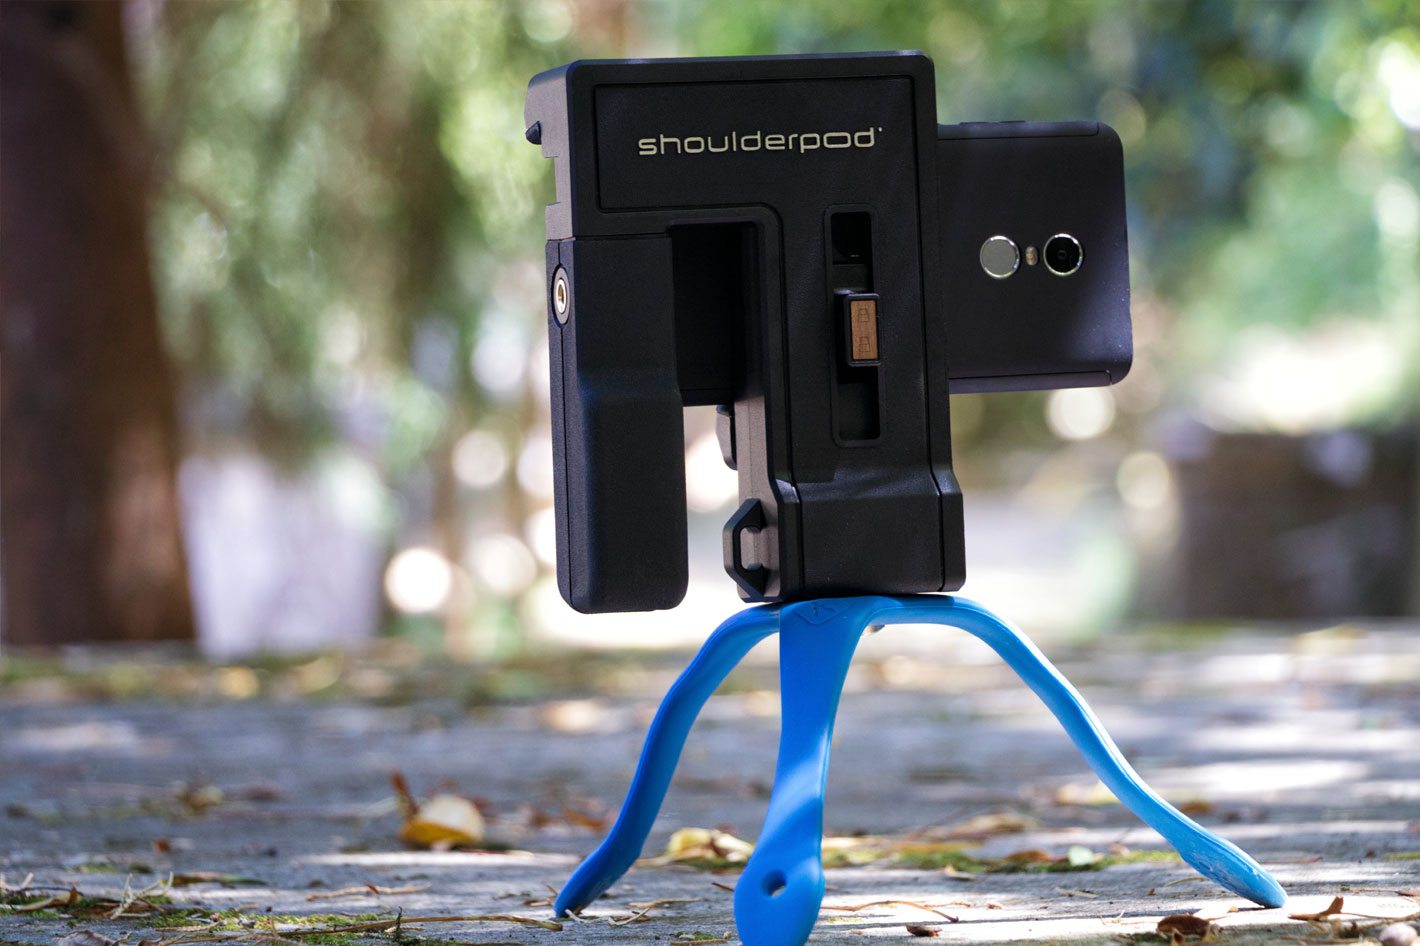 Review: two years using a Shoulderpod G2 smartphone grip